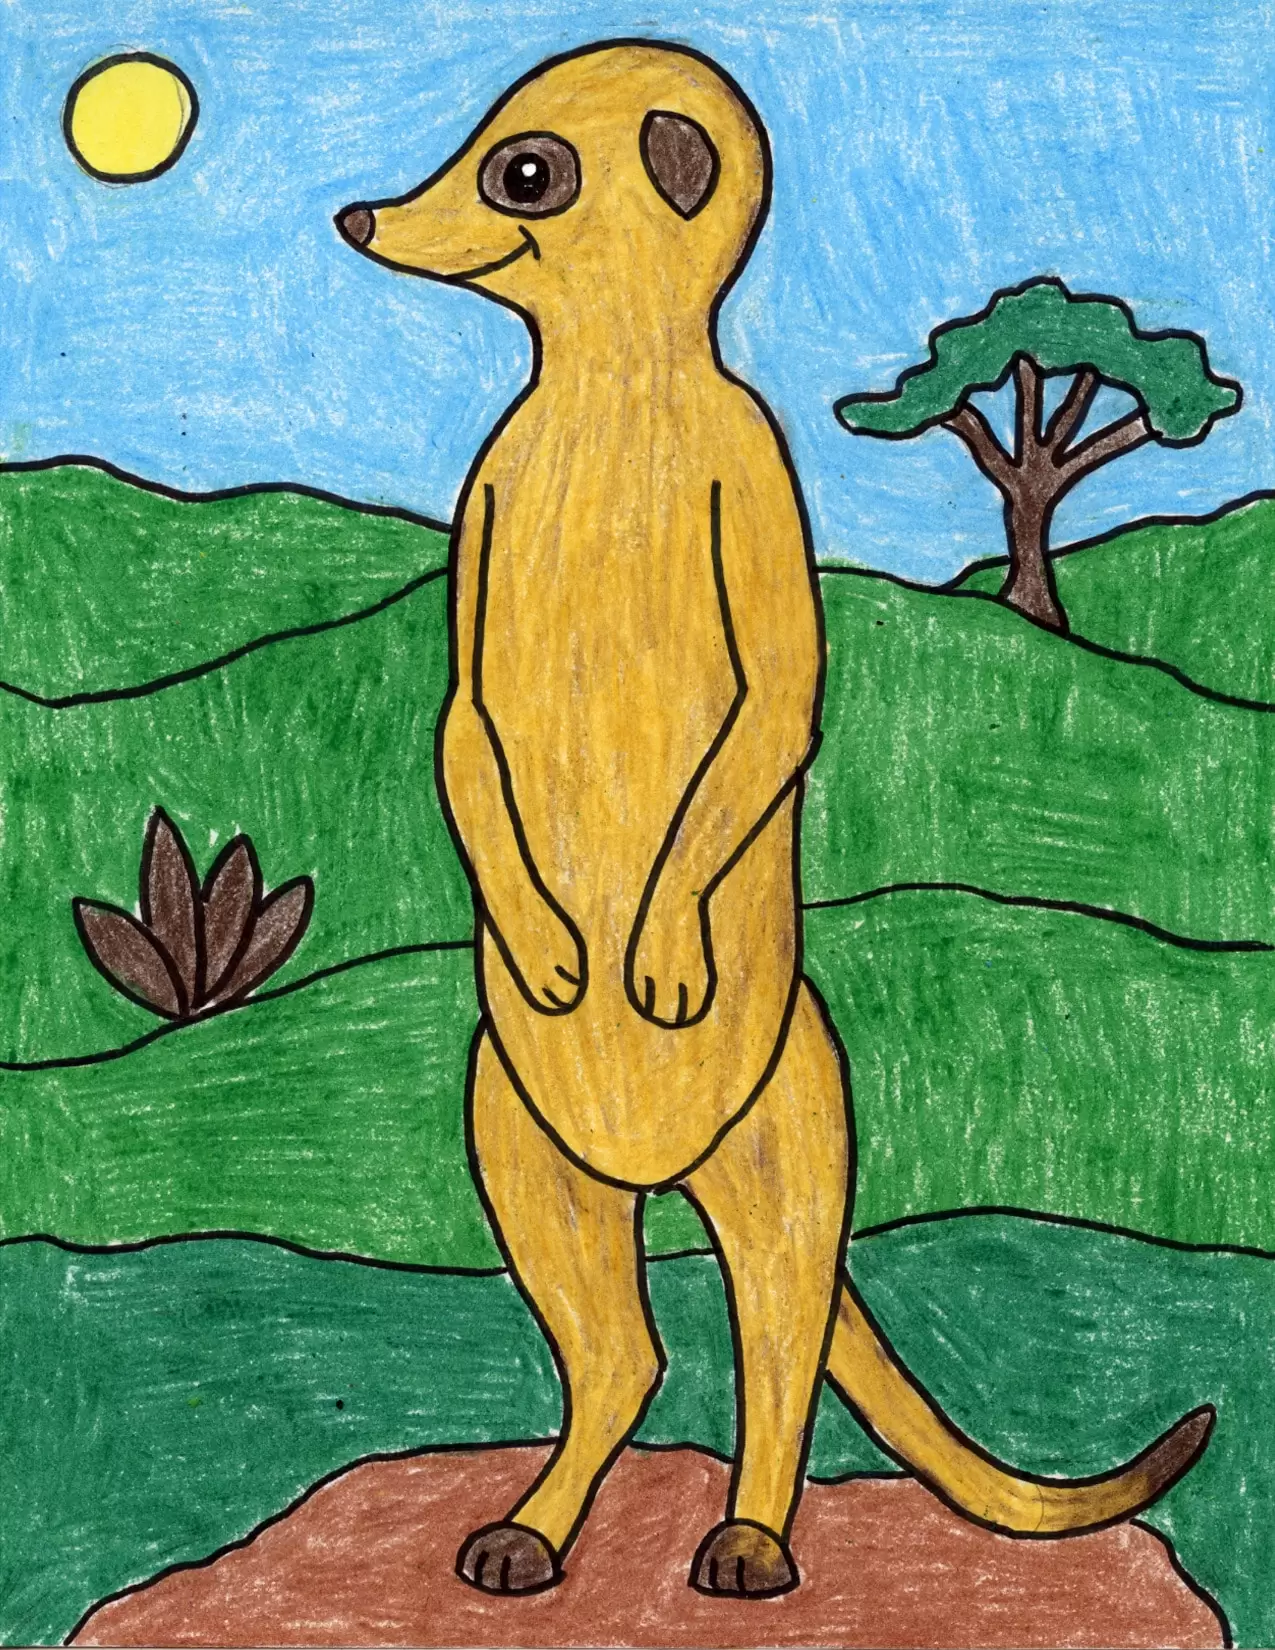 Easy How to Draw a Meerkat Tutorial and Meerkat Coloring Page